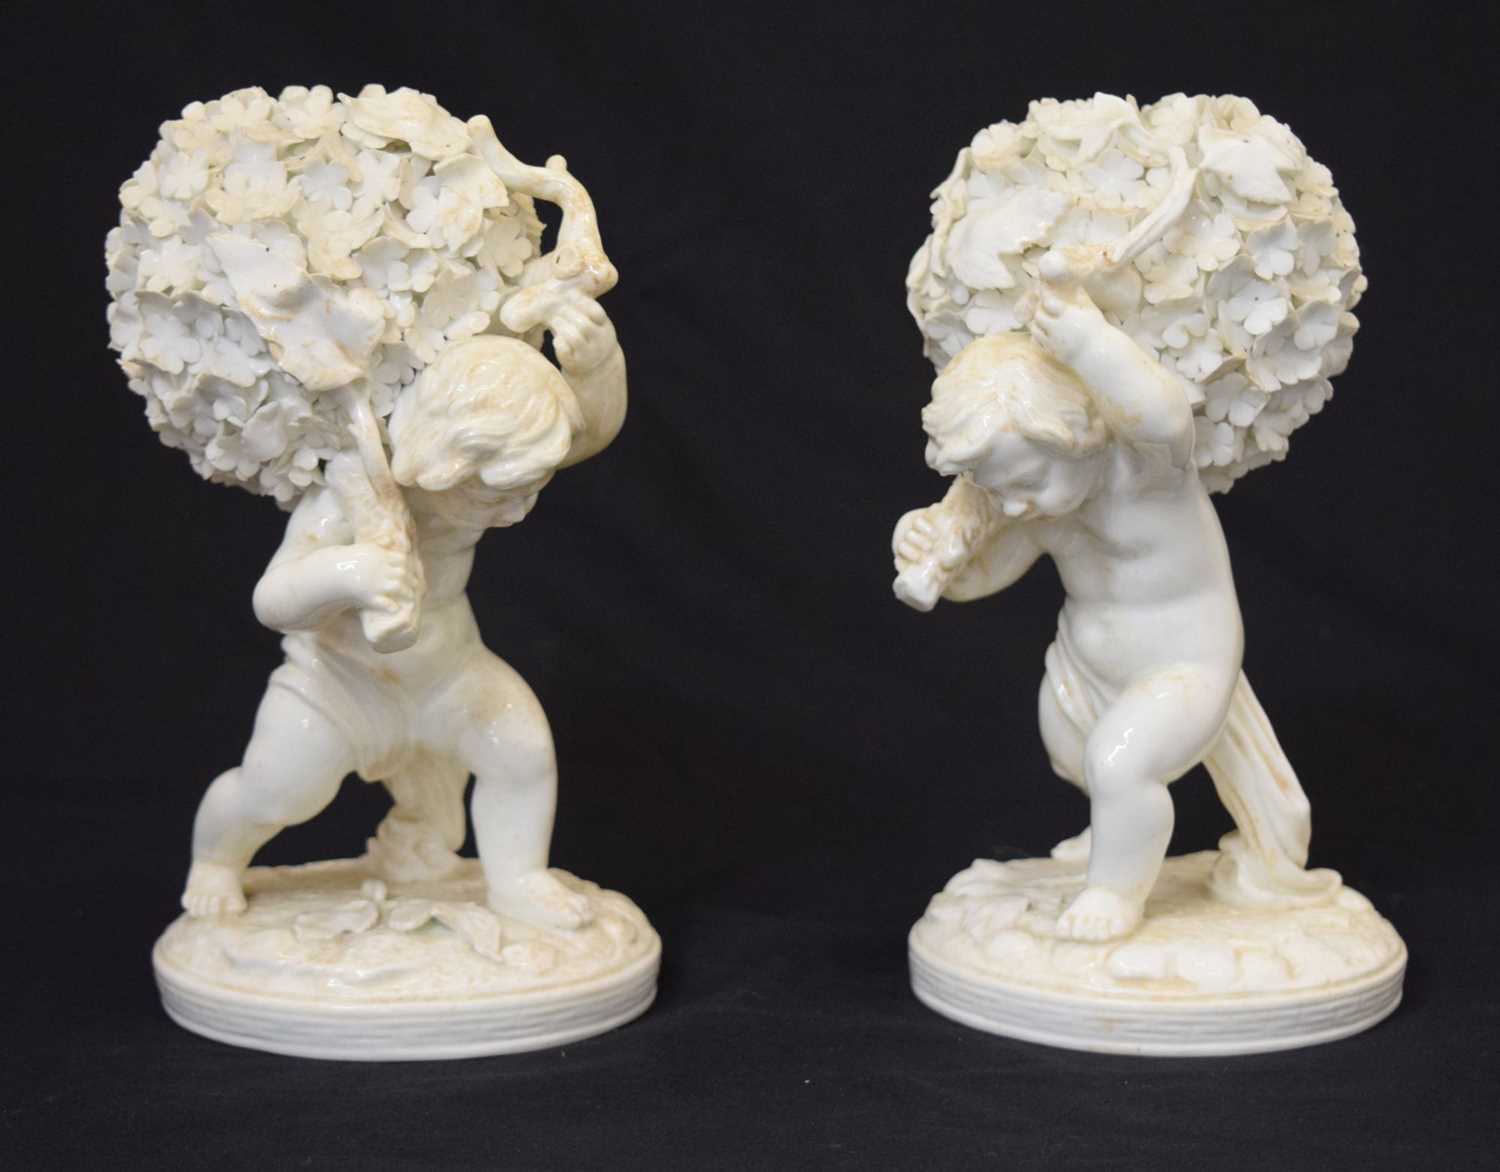 Pair of late 19th century Moore Brothers porcelain figures of cherubs